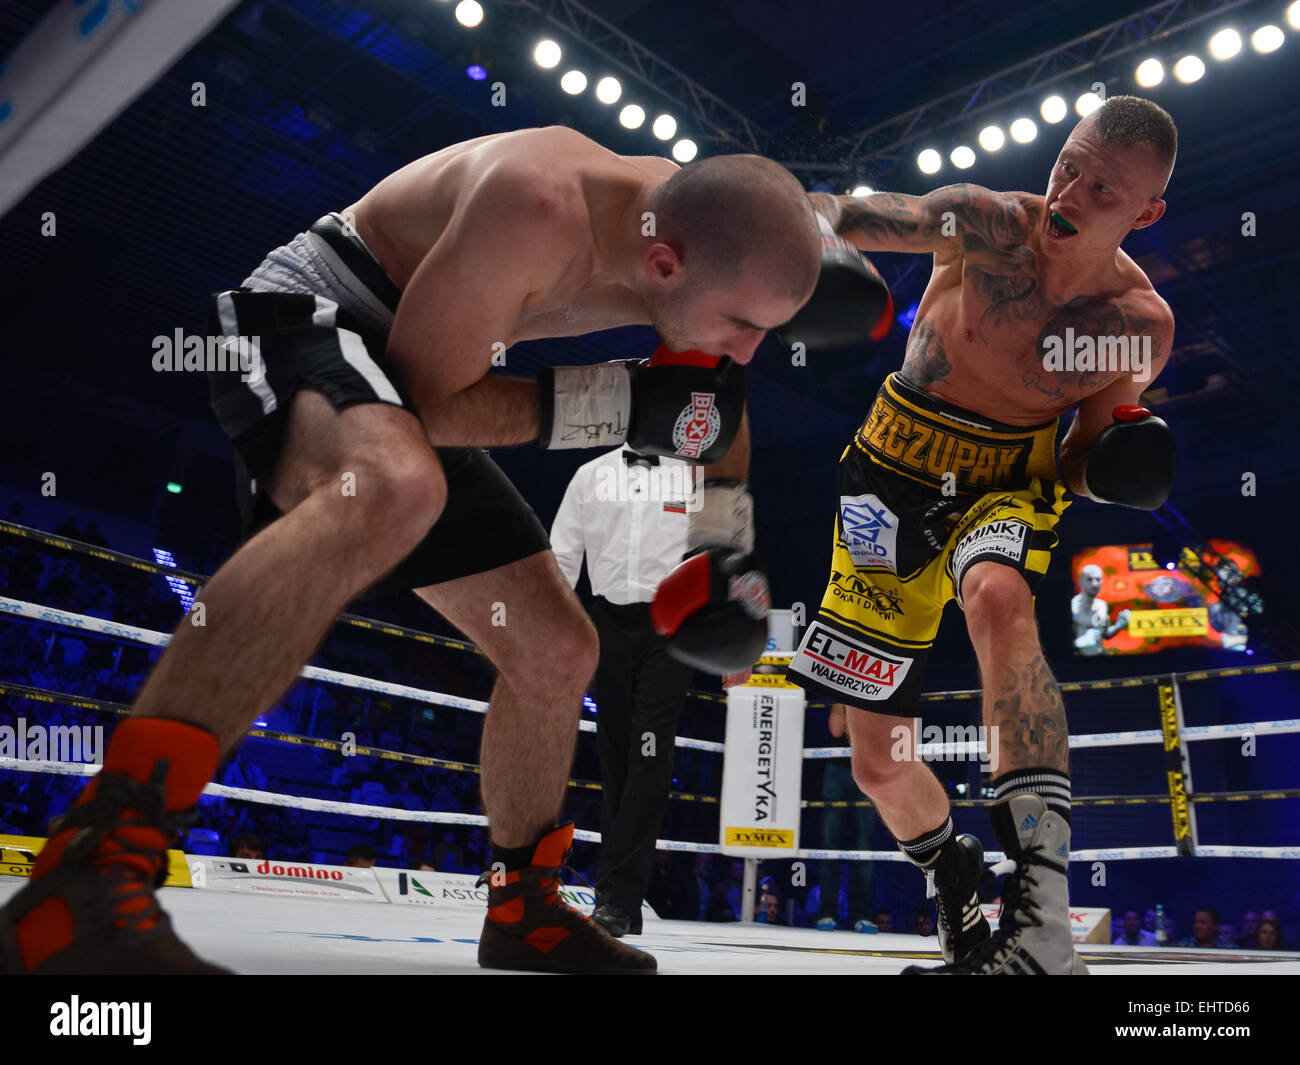 LUBIN, POLAND - MARCH 14, 2015: Professional boxing fight between Michal Lesniak (yellow short) and Lukas Leskovic (black short) Stock Photo